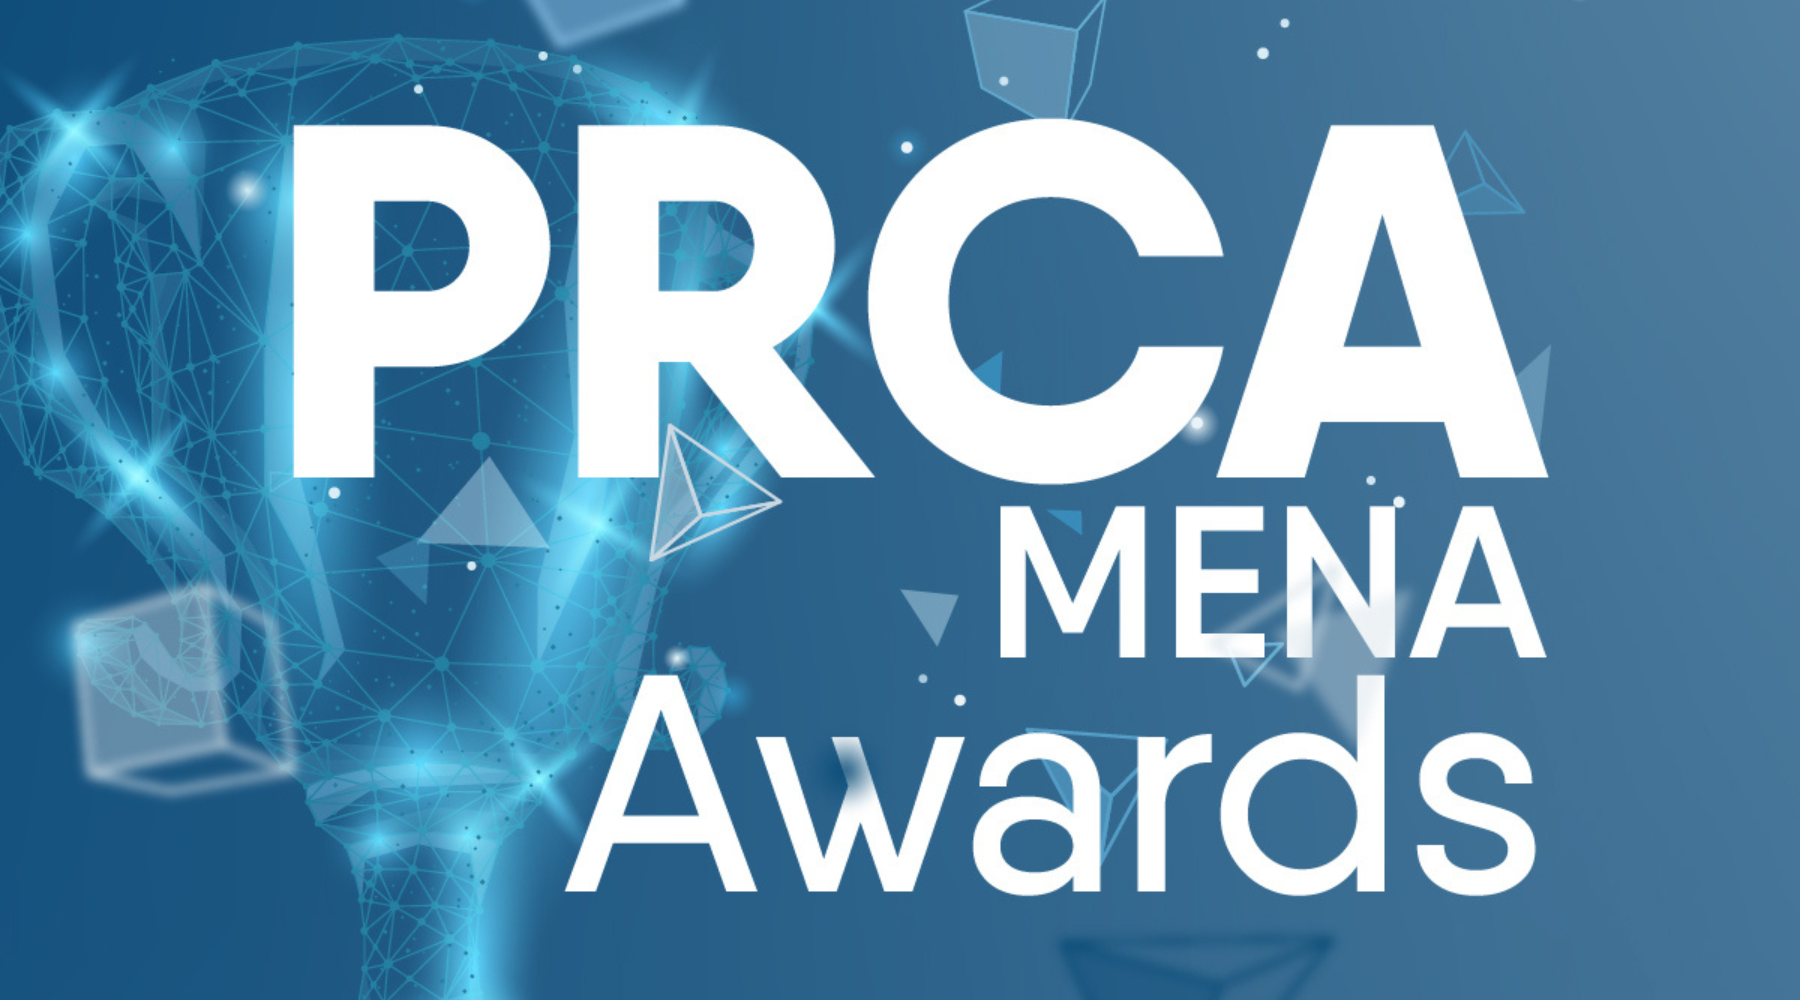 PRCA MENA Awards Announce Winners for 2023 Edition